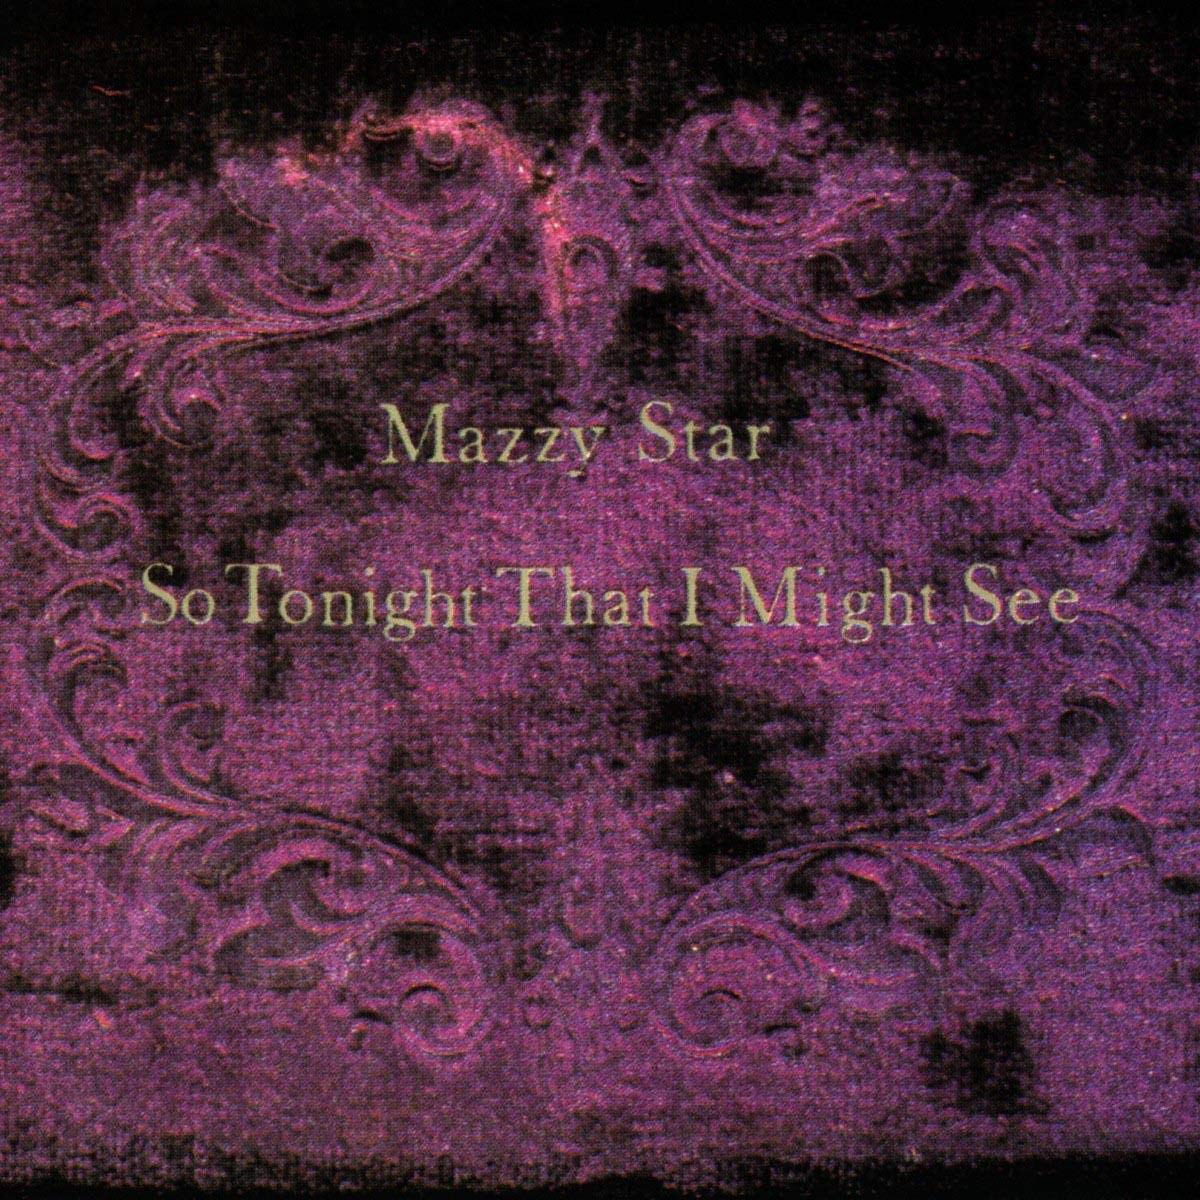 Mazzy Star "So Tonight That I Might See" CD